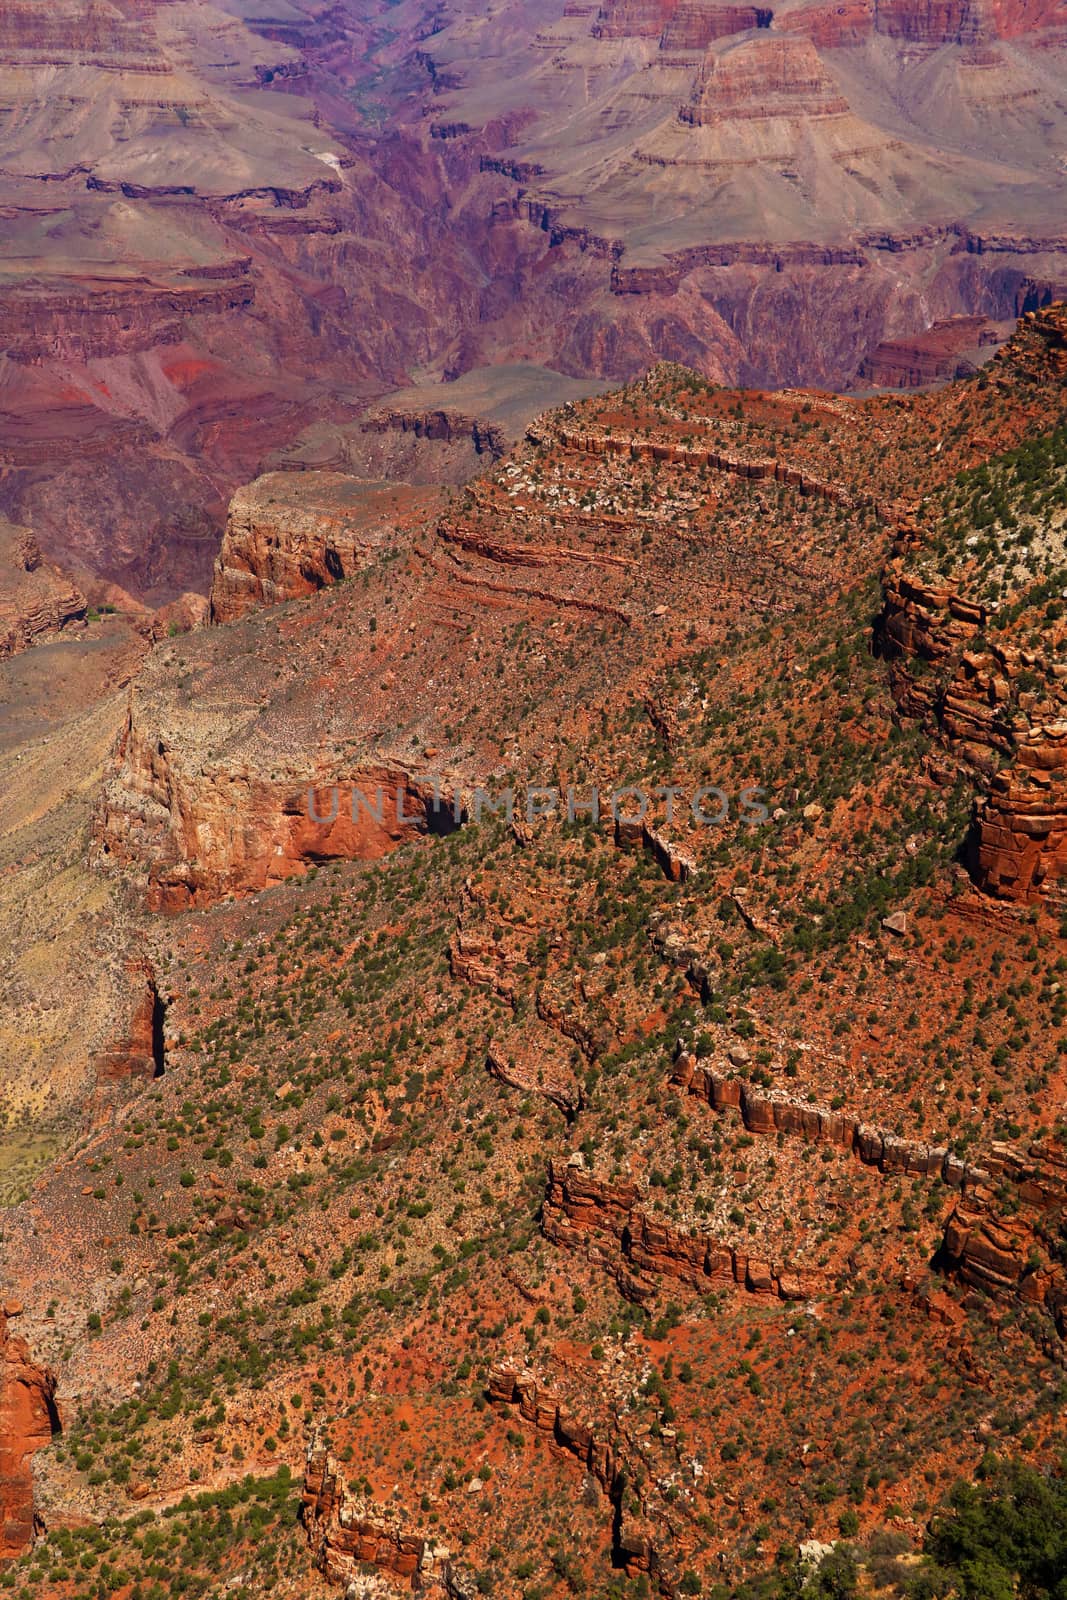 View of the south rim, Grand Canyon National Park. by kip02kas